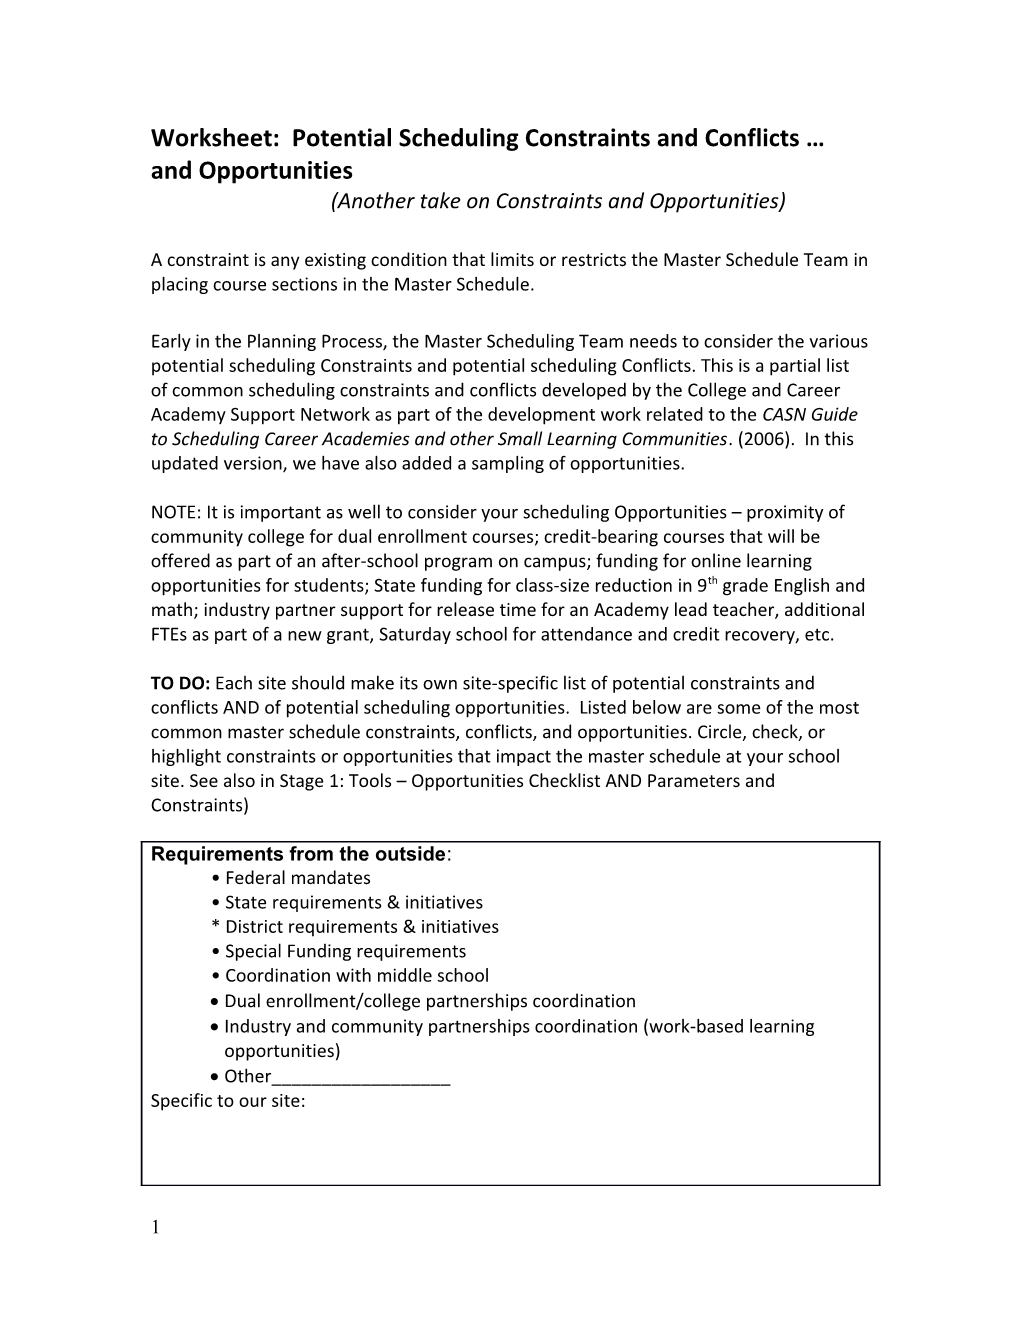 Worksheet: Potential Scheduling Constraints and Conflicts and Opportunities